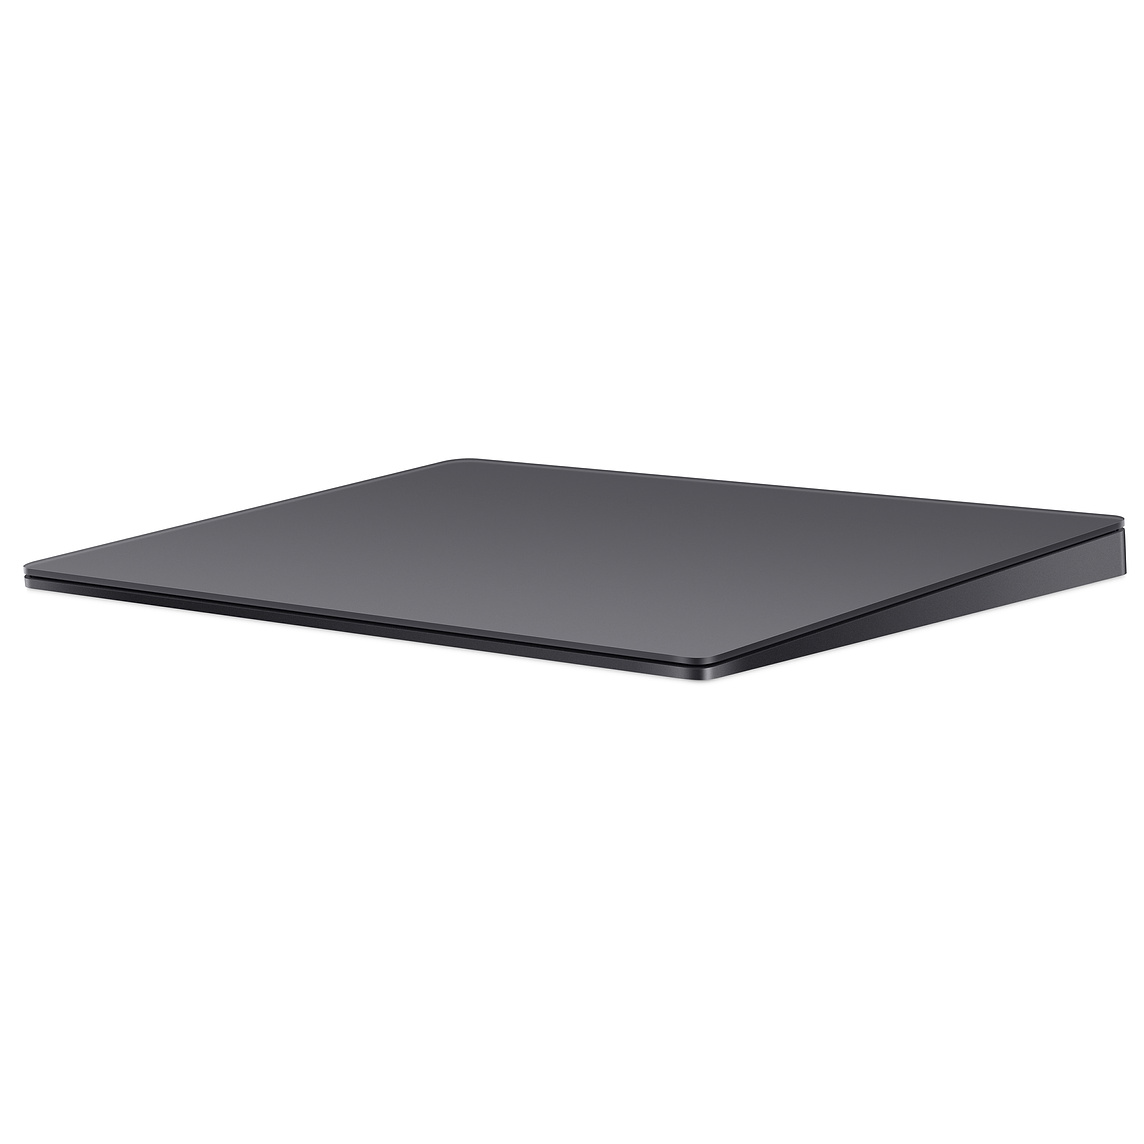 Apple Magic Trackpad 2 On Sale for $44 Off [Deal]